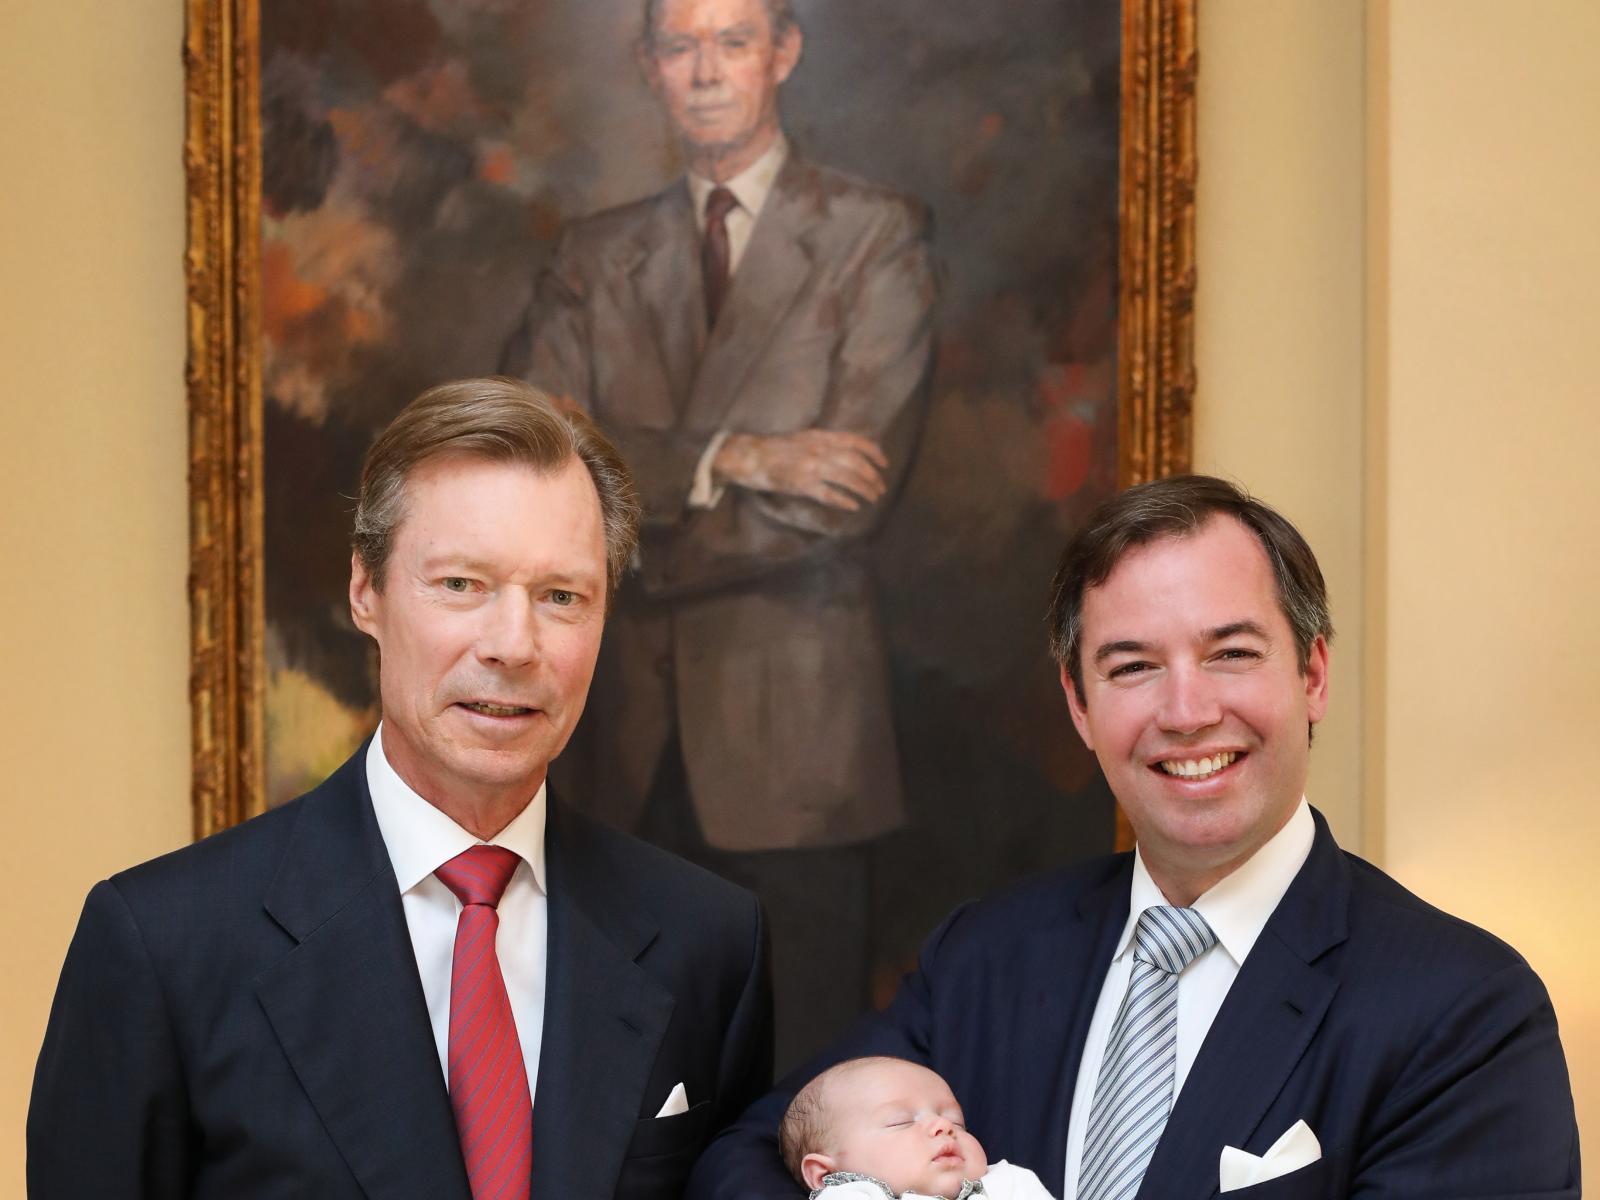 Four generations: The Grand Duke, the Hereditary Grand Duke and Prince Charles in front of the portrait of Grand Duke Jean